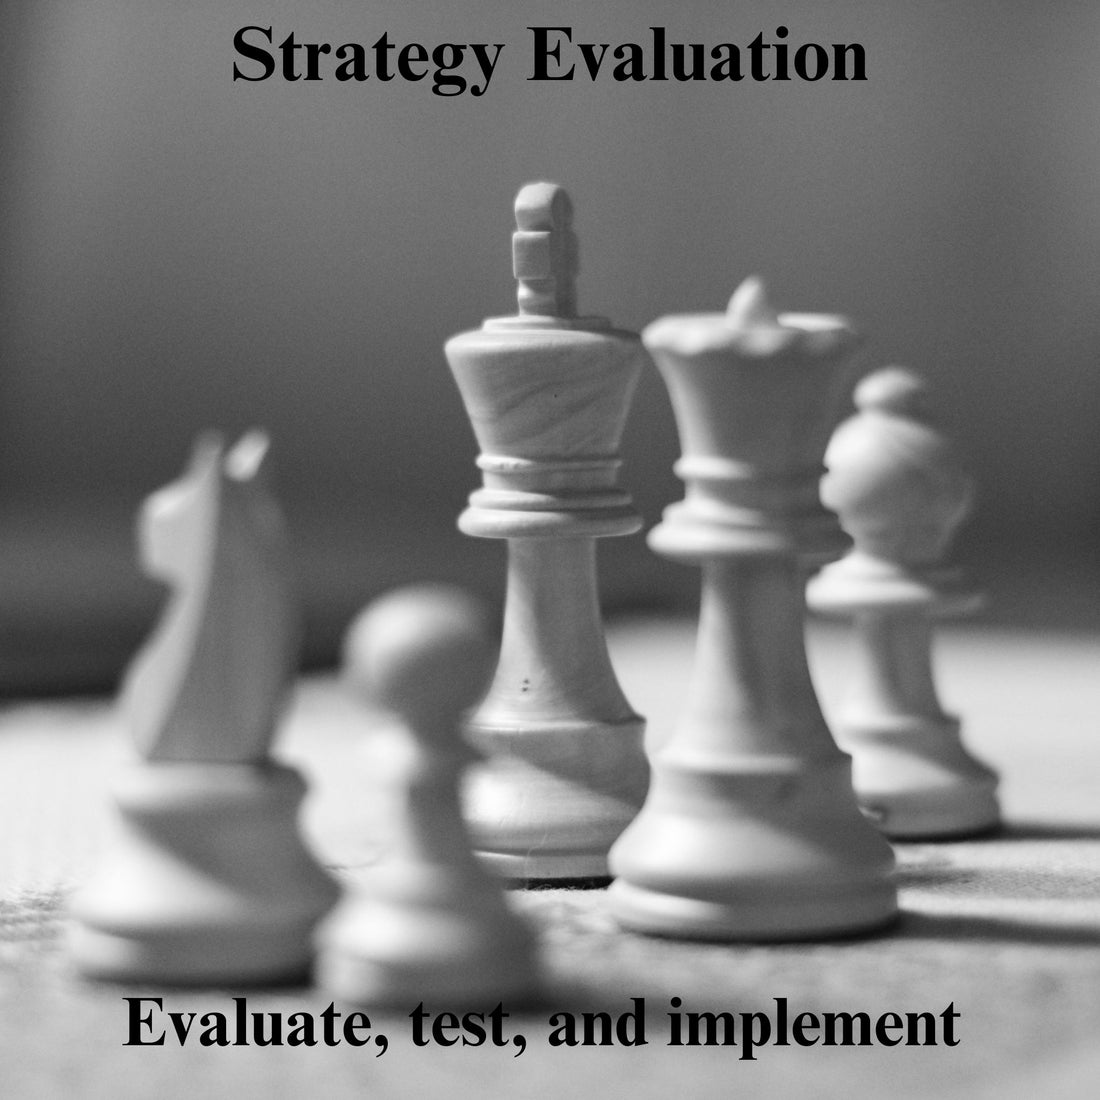 Strategy evaluation: Evaluate, test, and implement for sustained business growth.